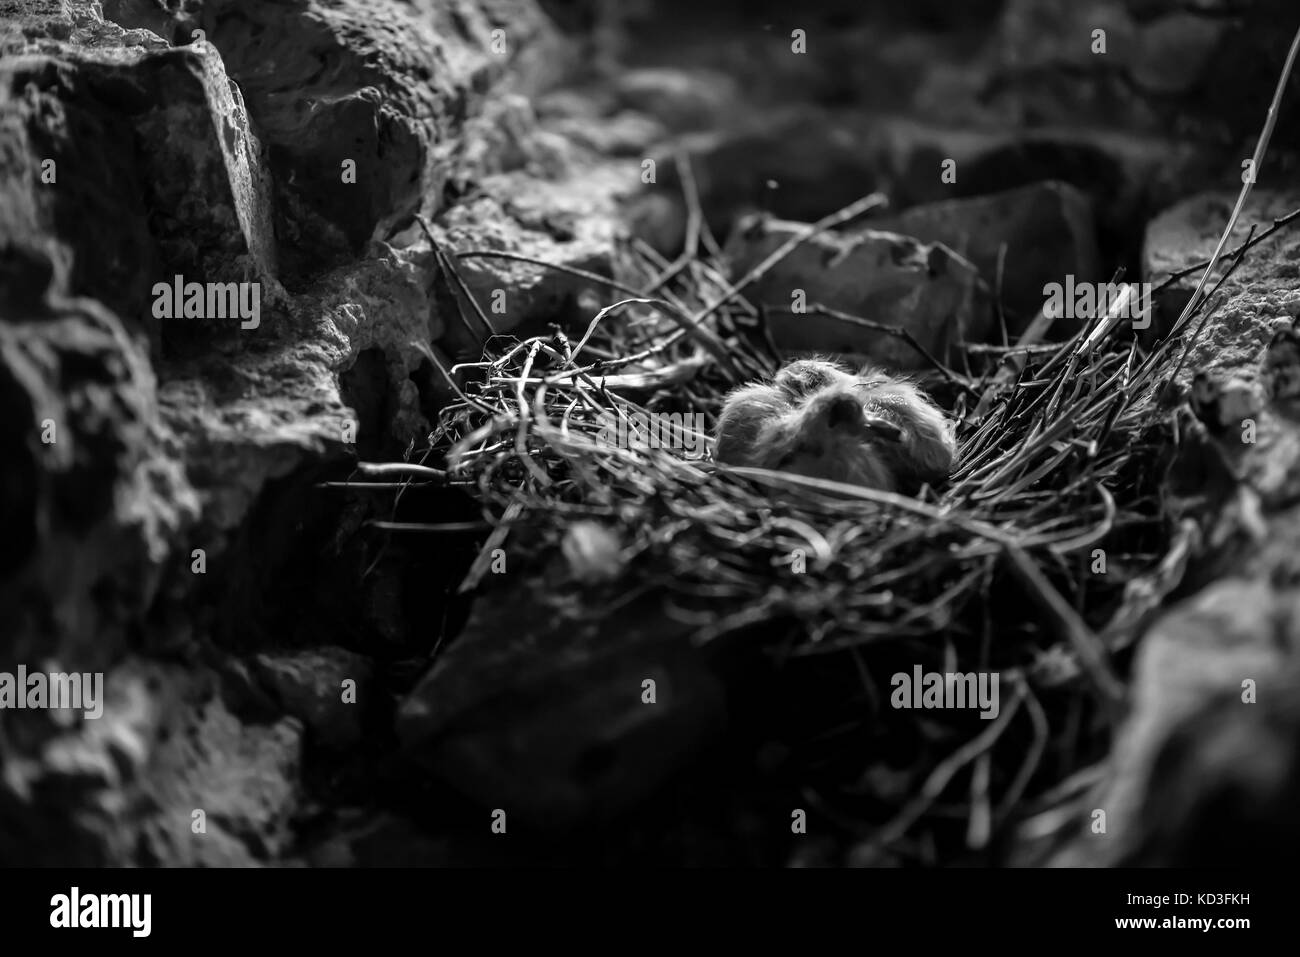 Bird nest wallpaper Black and White Stock Photos & Images - Alamy